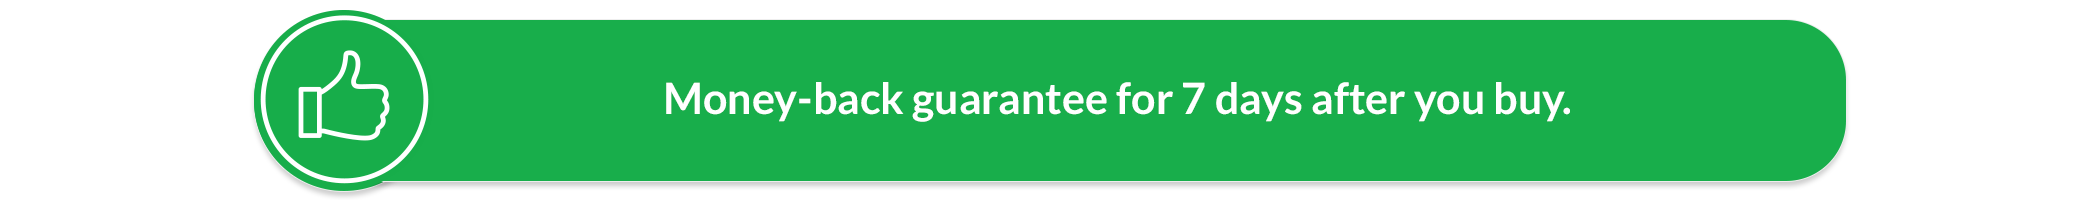 Money-back guarantee for 7 days after you buy.